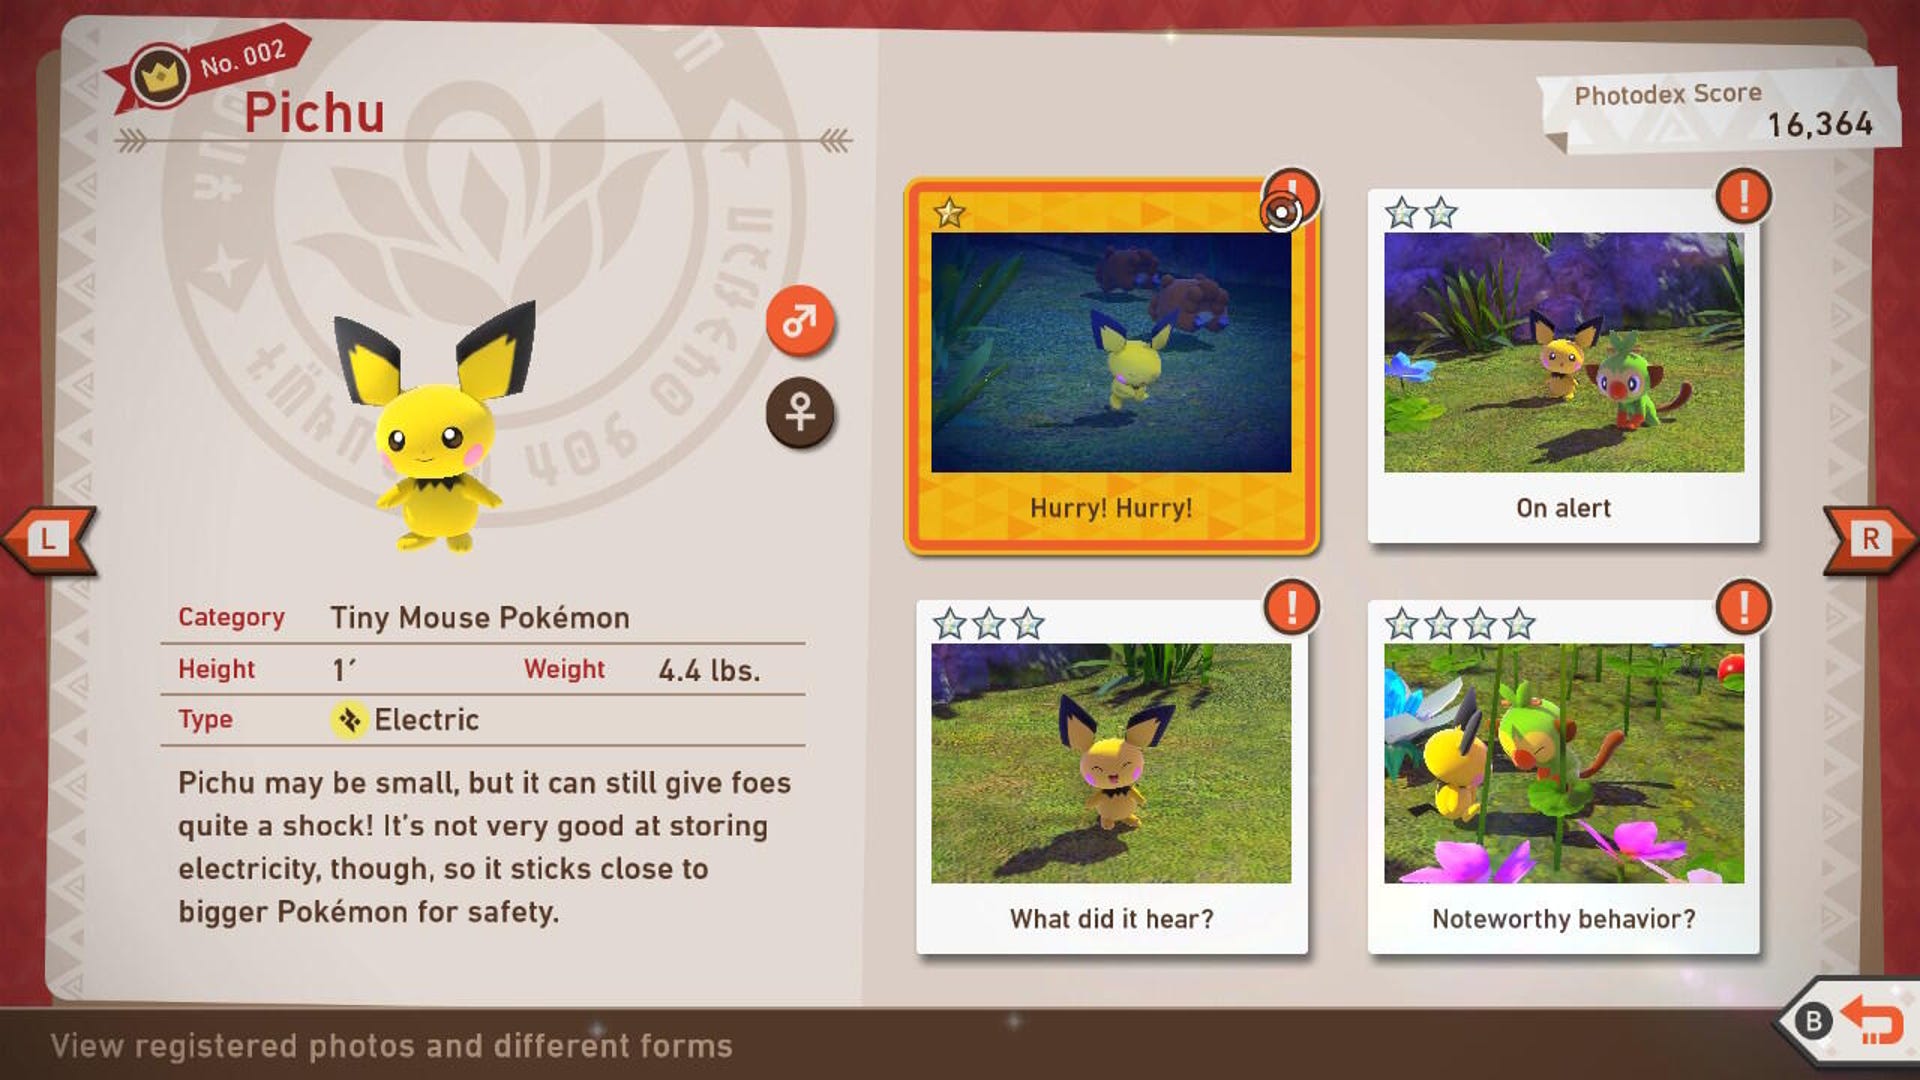 Photodex for Pichu in New Pokemon Snap